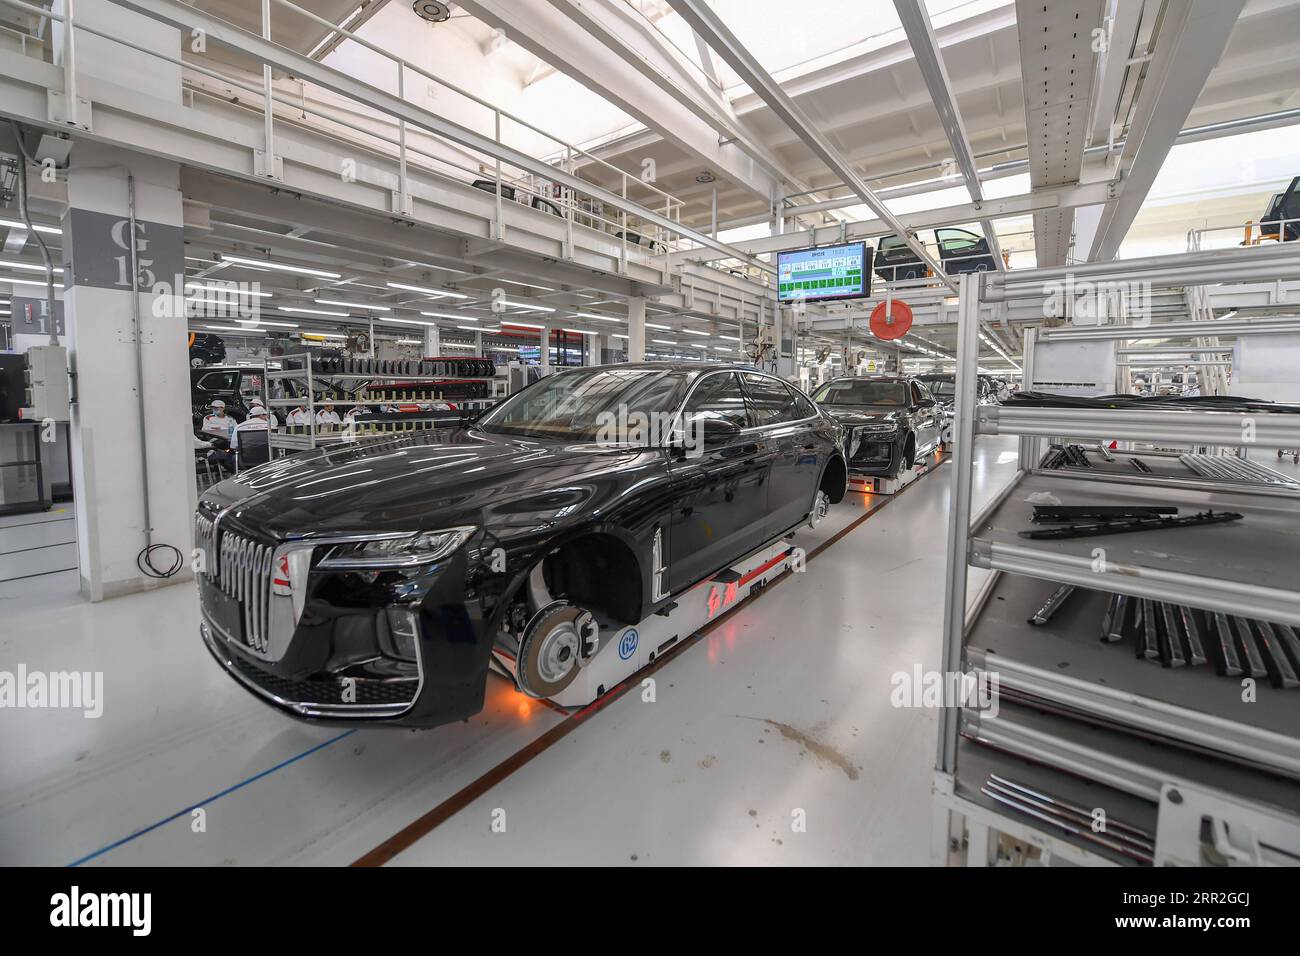 201012 -- CHANGCHUN, Oct. 12, 2020 -- Cars wait for assembling at a factory of the First Automotive Works FAW Group Co., Ltd. in Changchun, capital of northeast China s Jilin Province, Sept. 23, 2020. China s leading automaker First Automotive Works FAW Group Co., Ltd. sold 2,656,744 vehicles in the first three quarters of the year, up 8 percent year on year, according to corporate sources.  CHINA-CHANGCHUN-FAW-SALES-GROWTH CN ZhangxNan PUBLICATIONxNOTxINxCHN Stock Photo